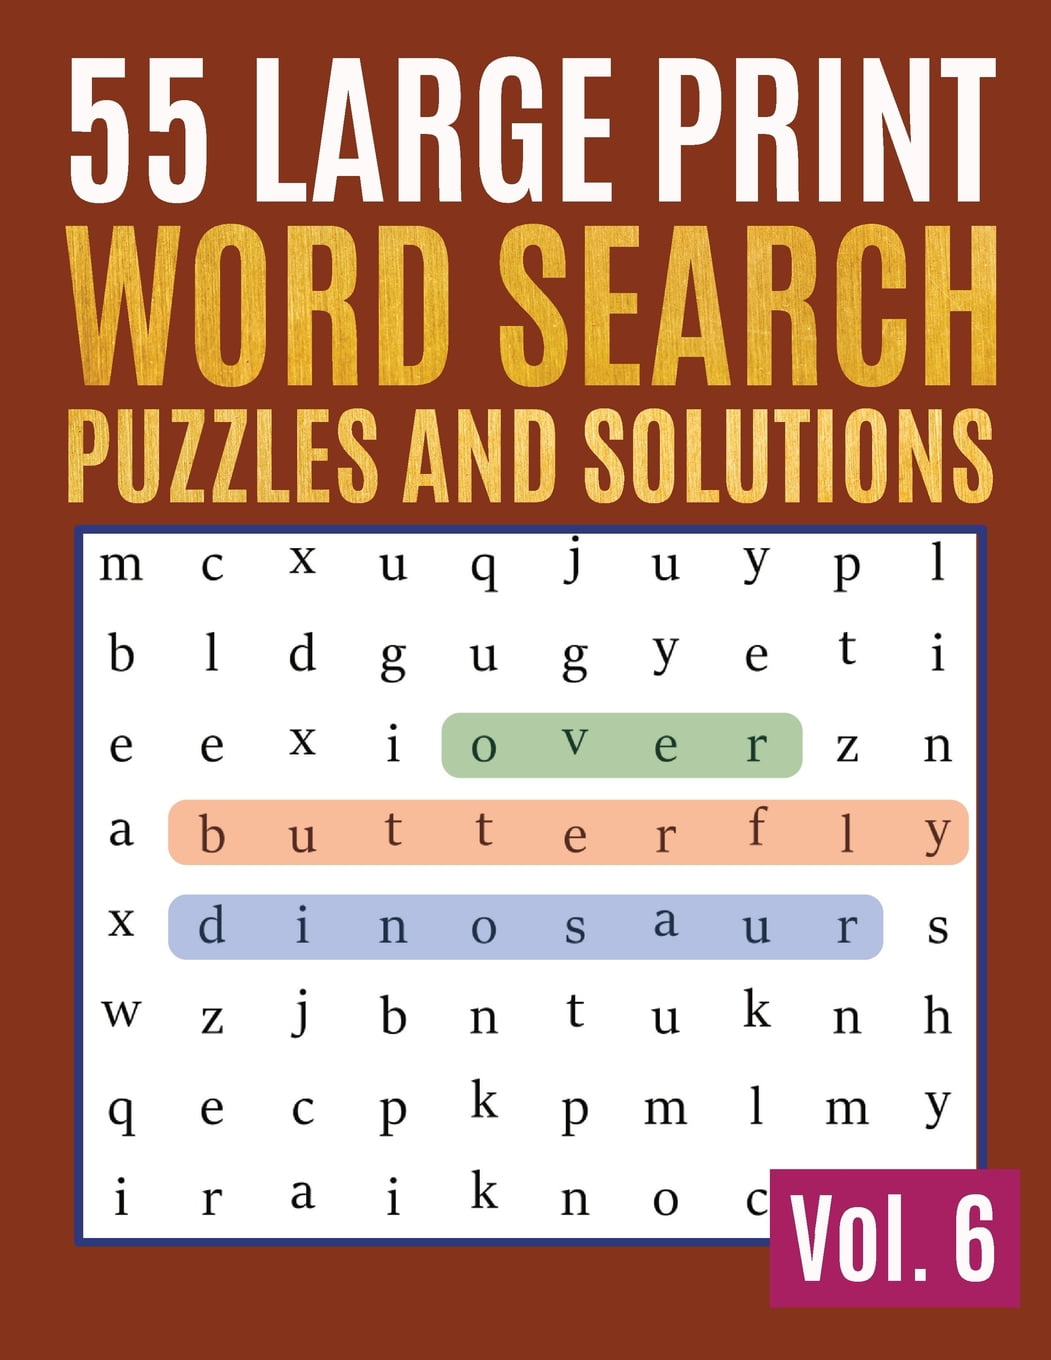 55-large-print-word-search-puzzles-and-solutions-activity-book-for